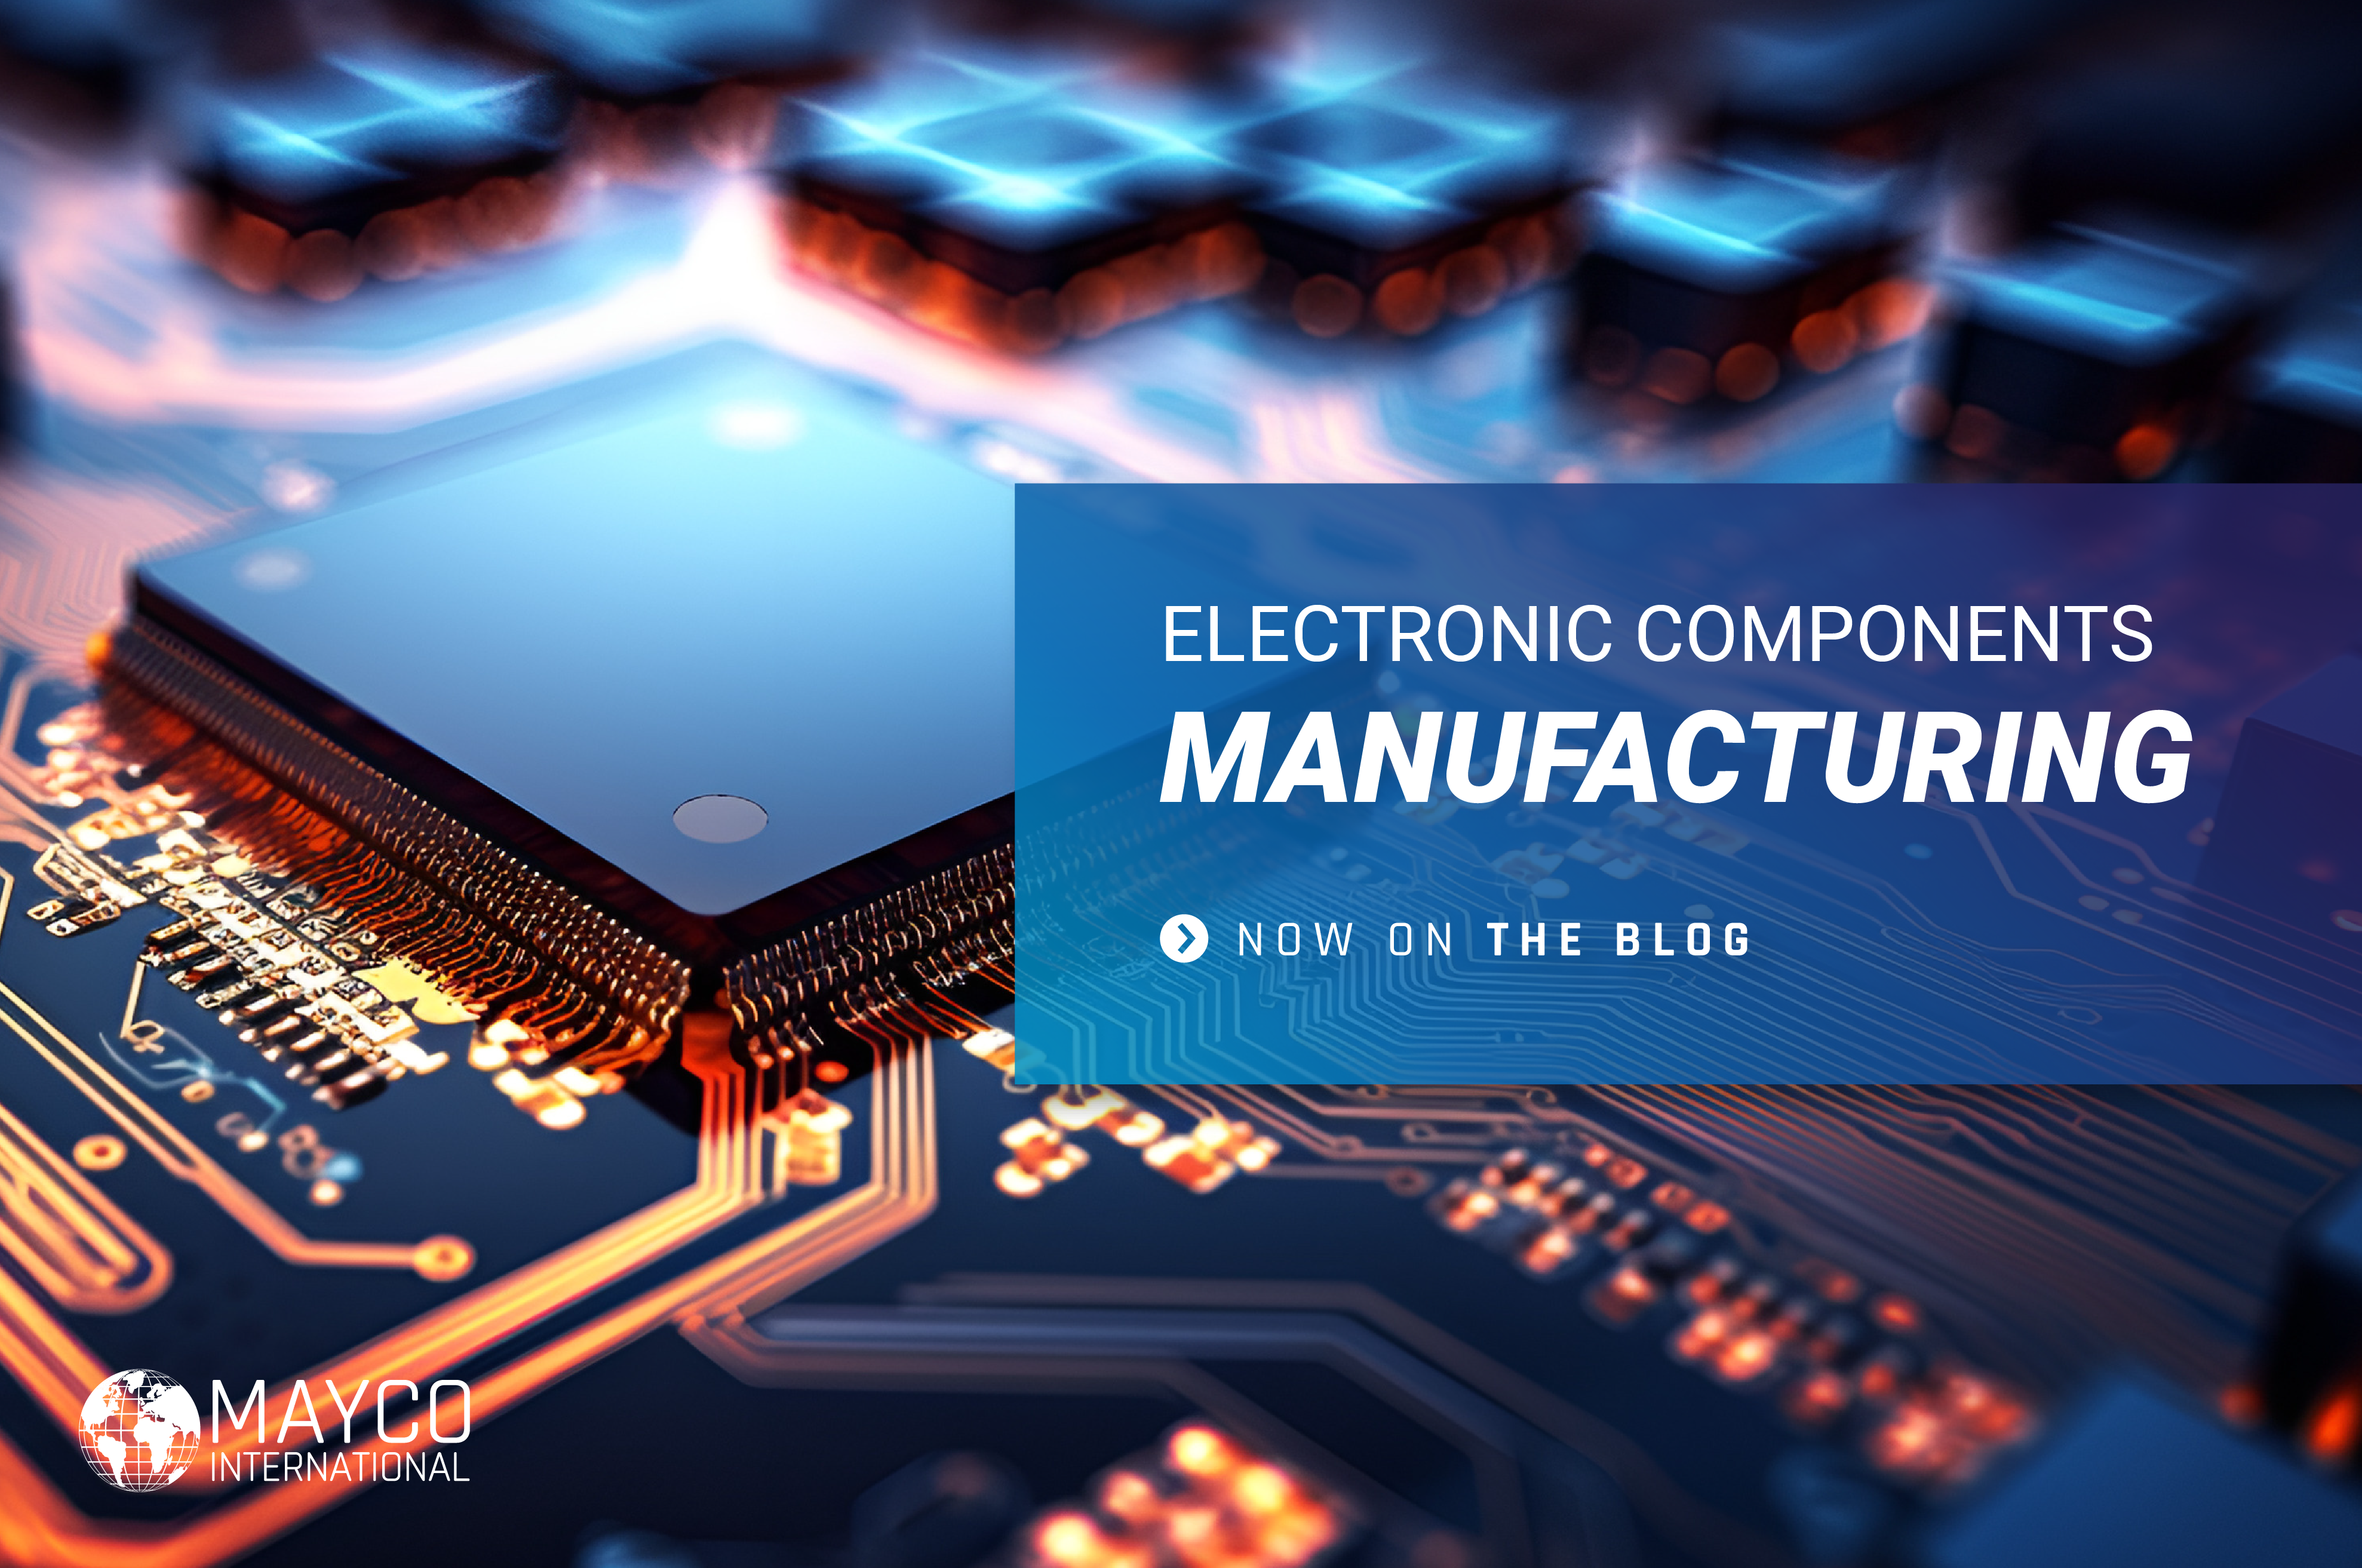 Electronic components manufacturing